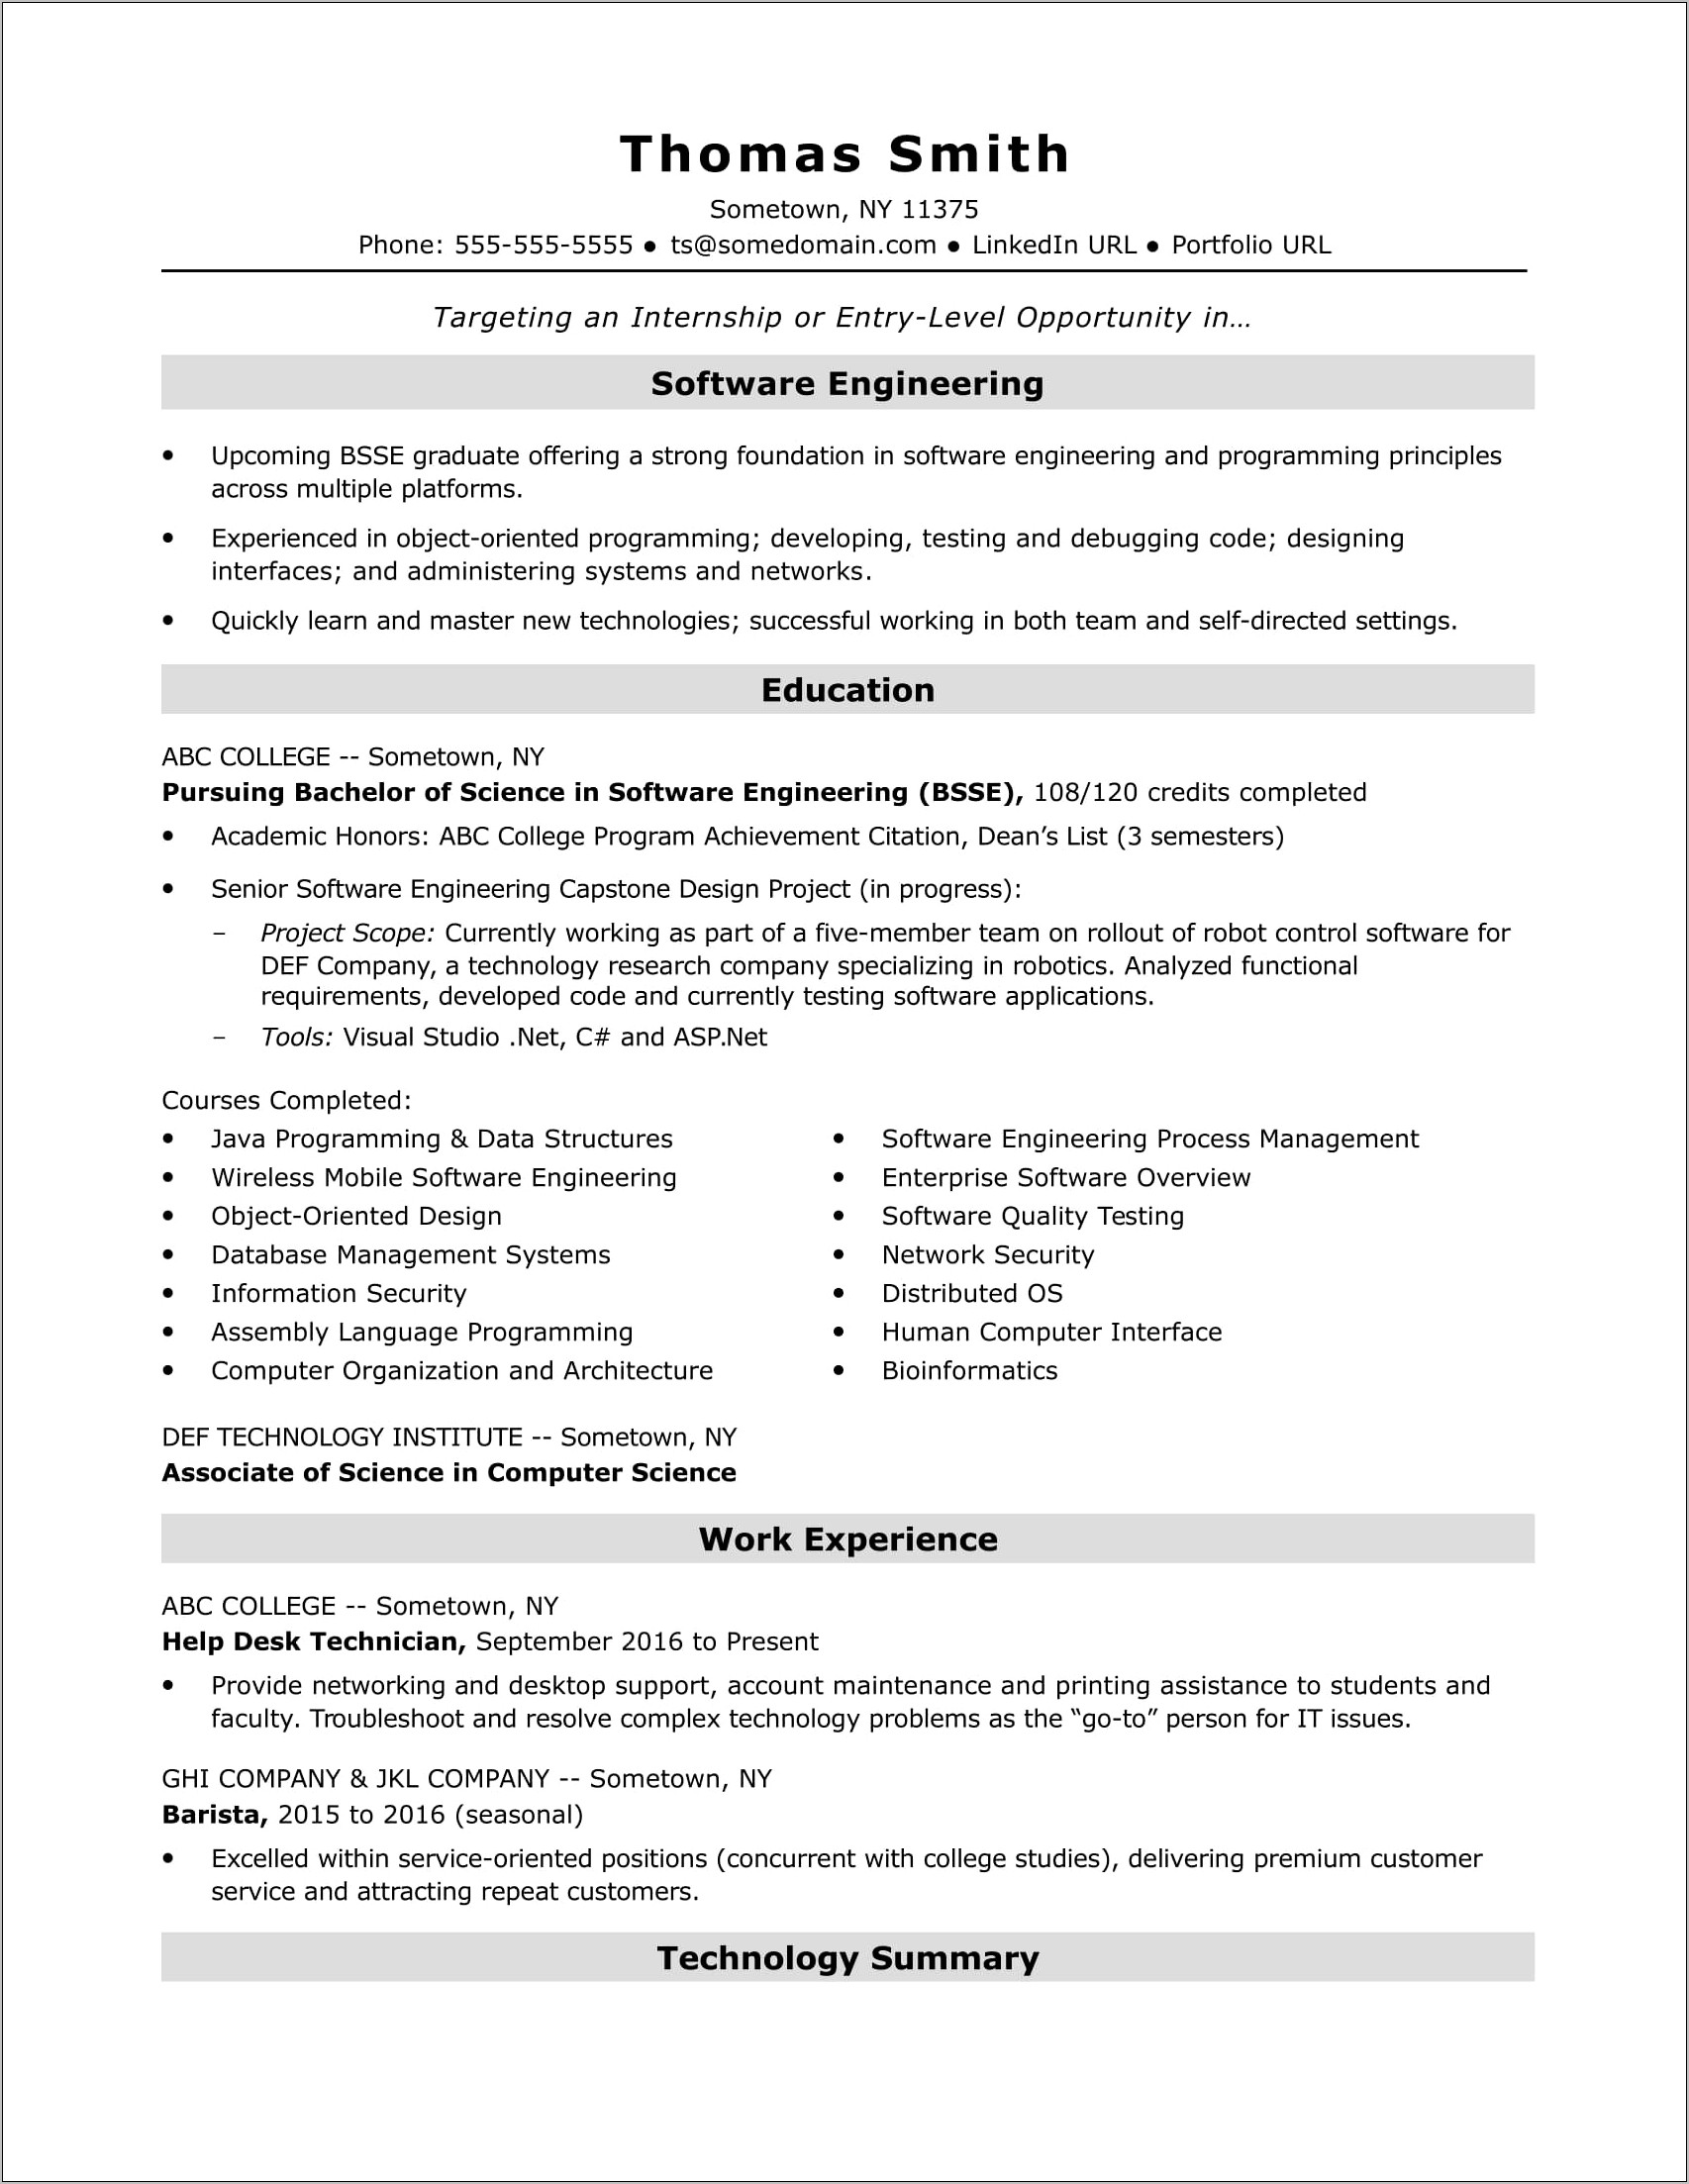 Quality Techincial Short Summary For Resume